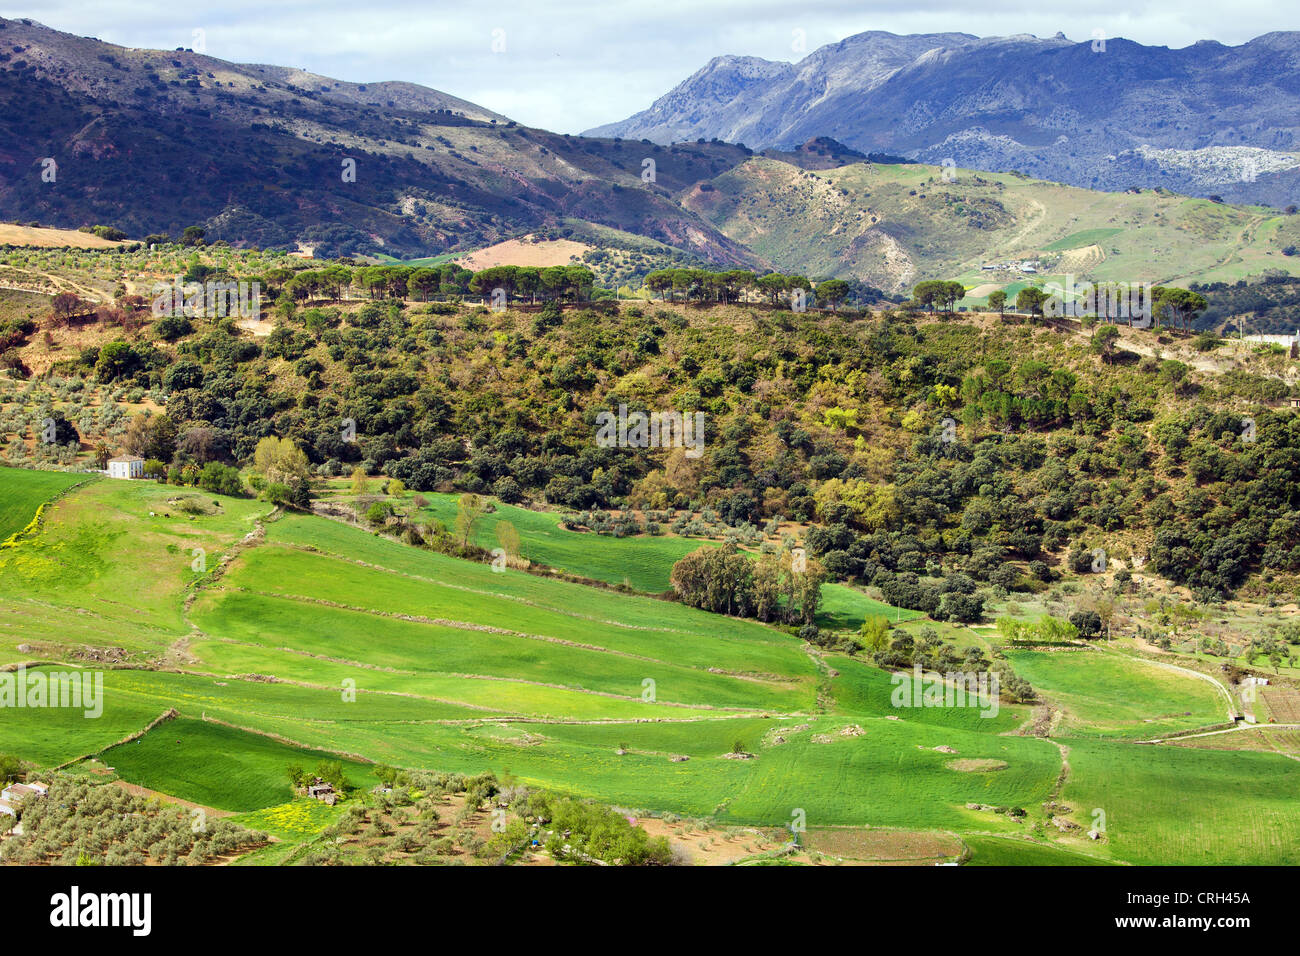 Andalusia countryside scenic landscape in southern Spain. Stock Photo